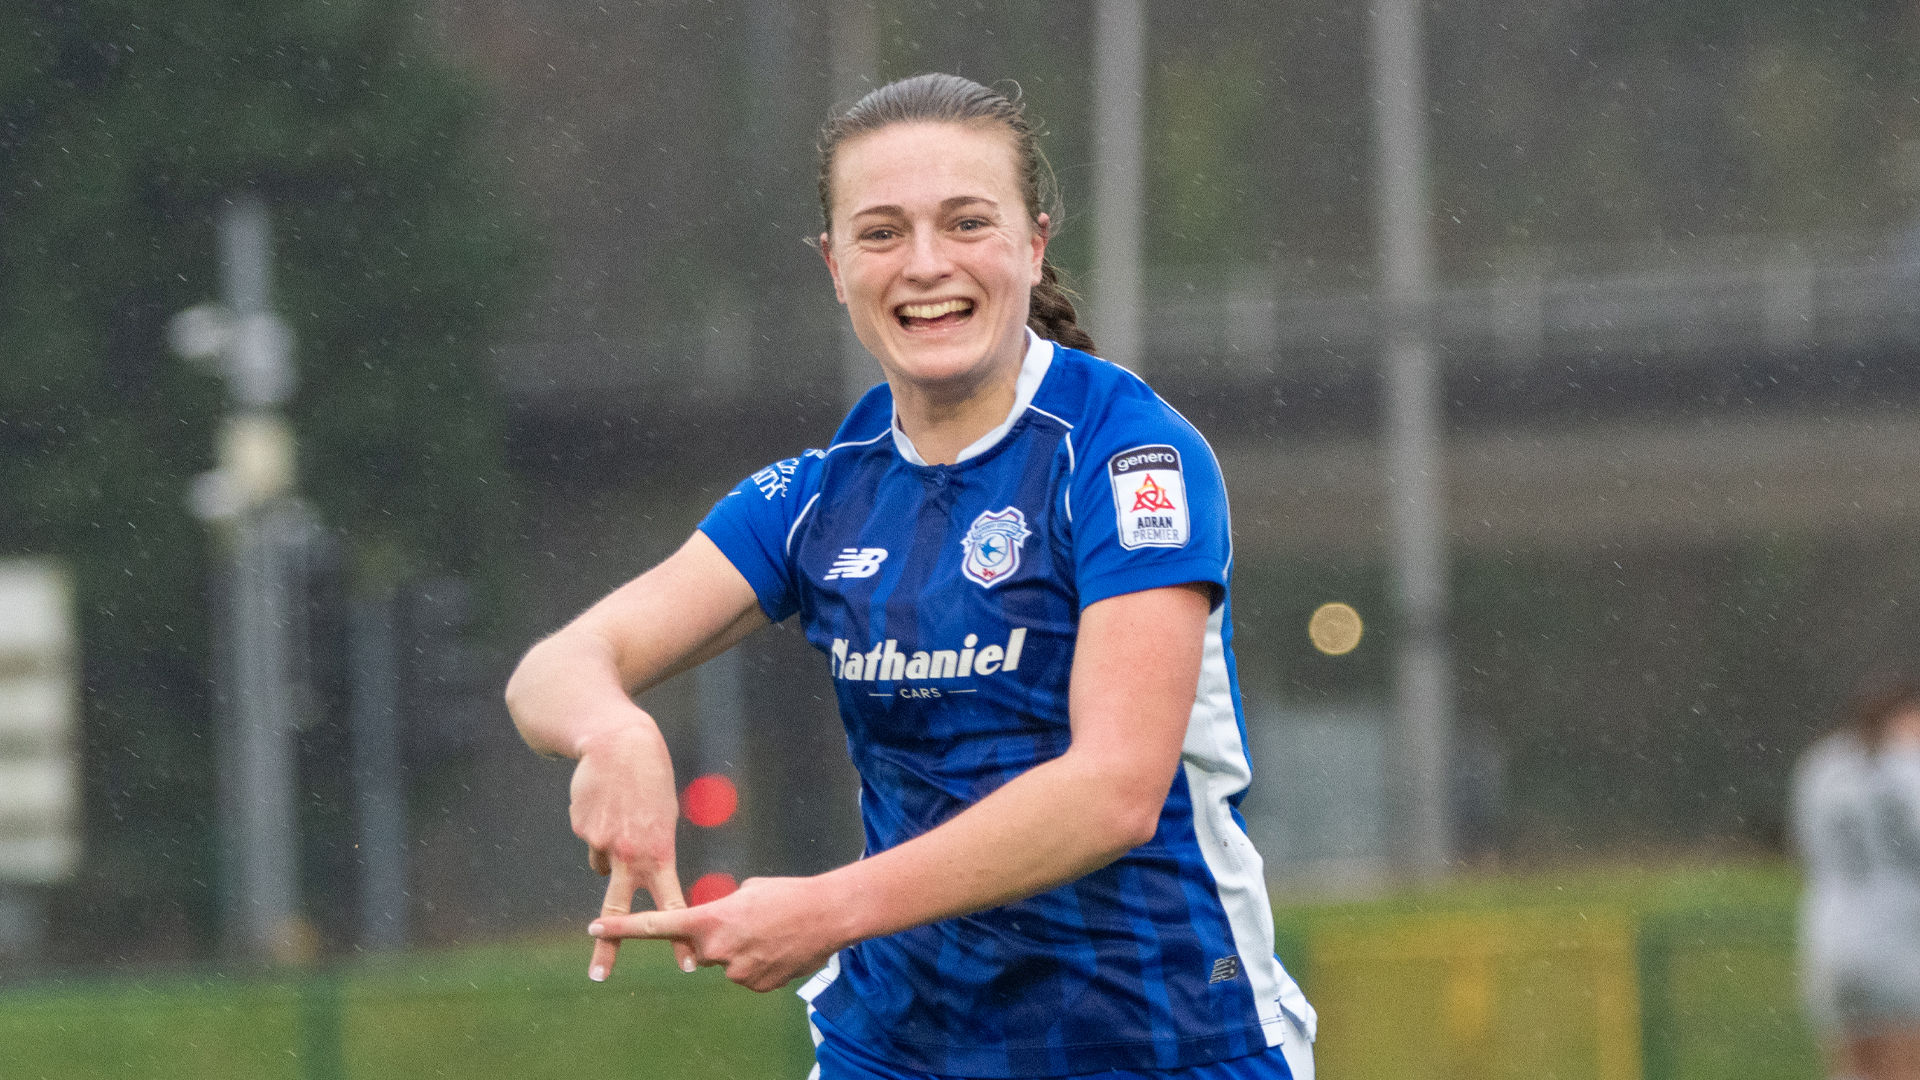 Ffion Price in action for Cardiff City Women